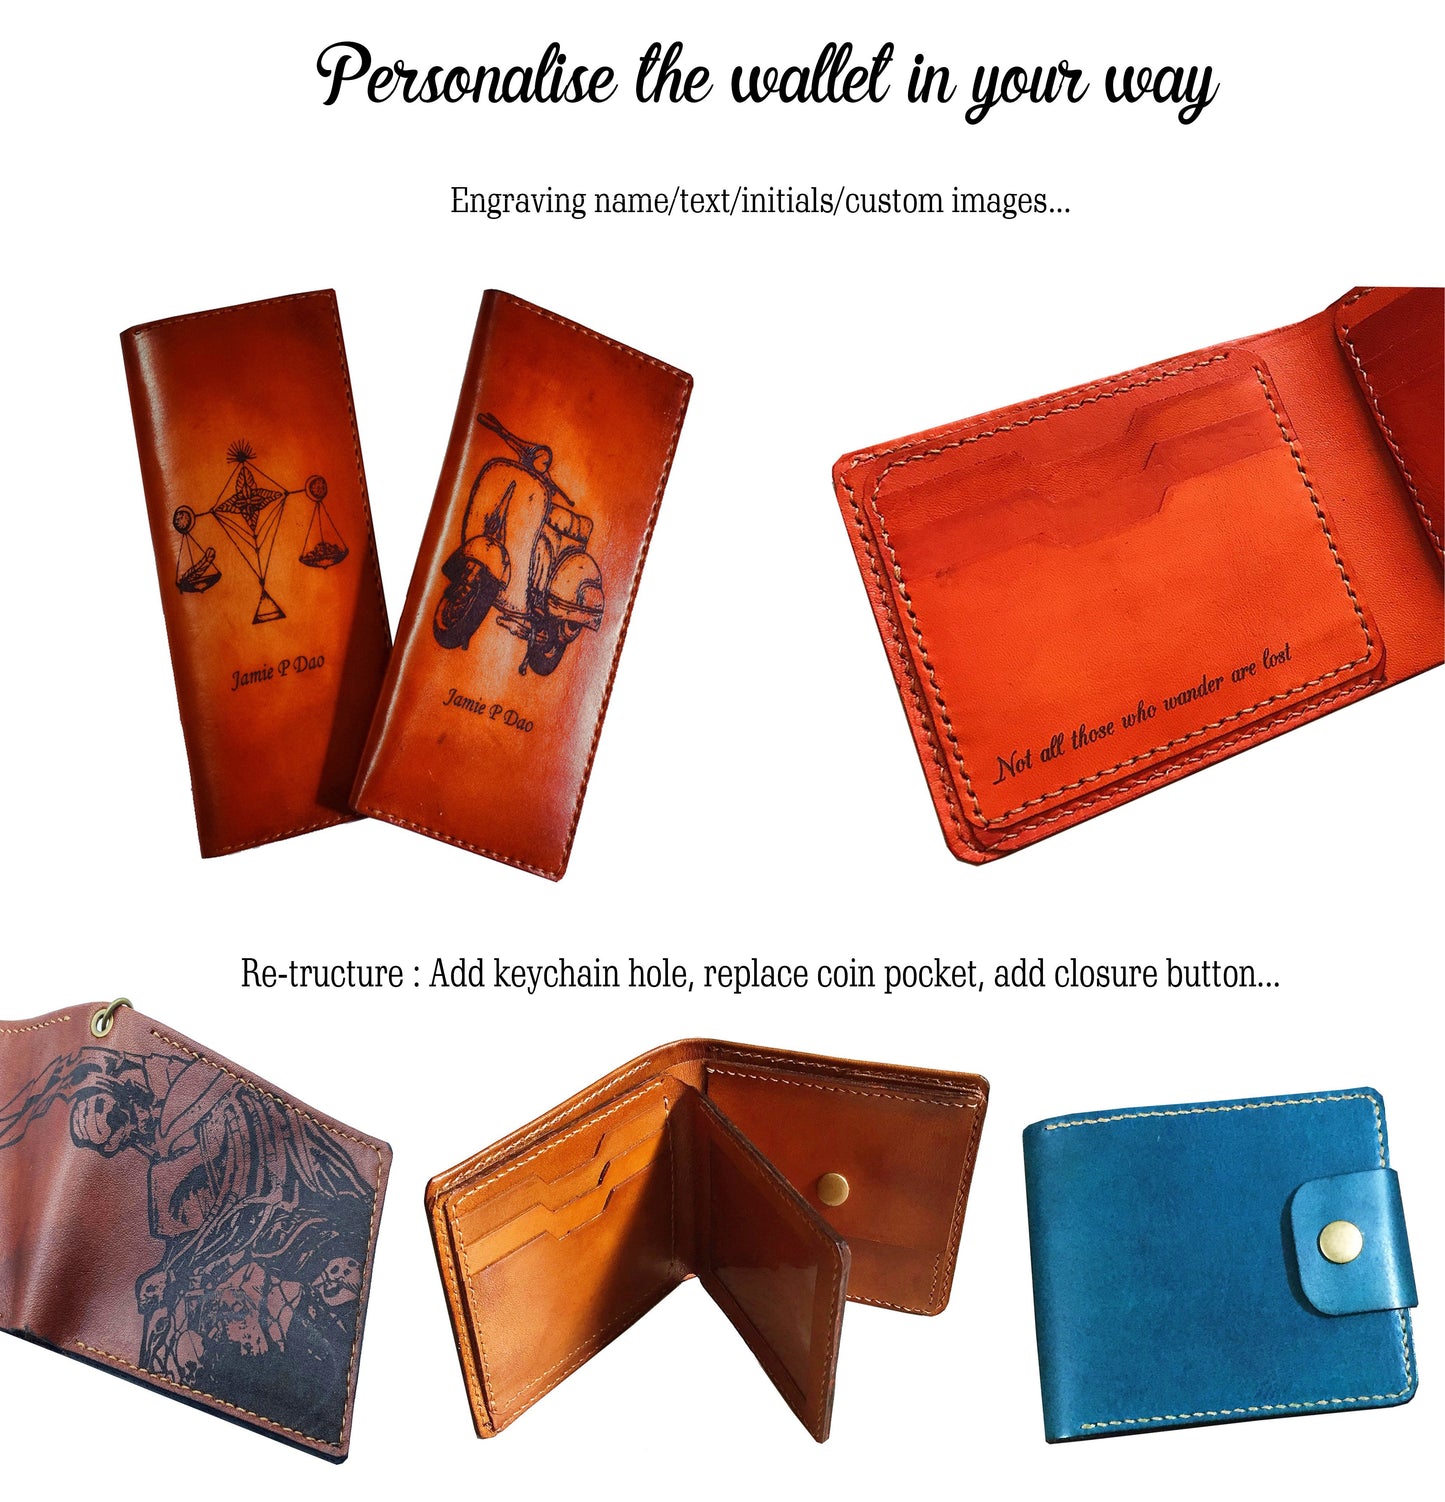 Mayan Corner - Godzilla King of the Monster leather handmade men's wallet, custom gifts for him, father's day gifts